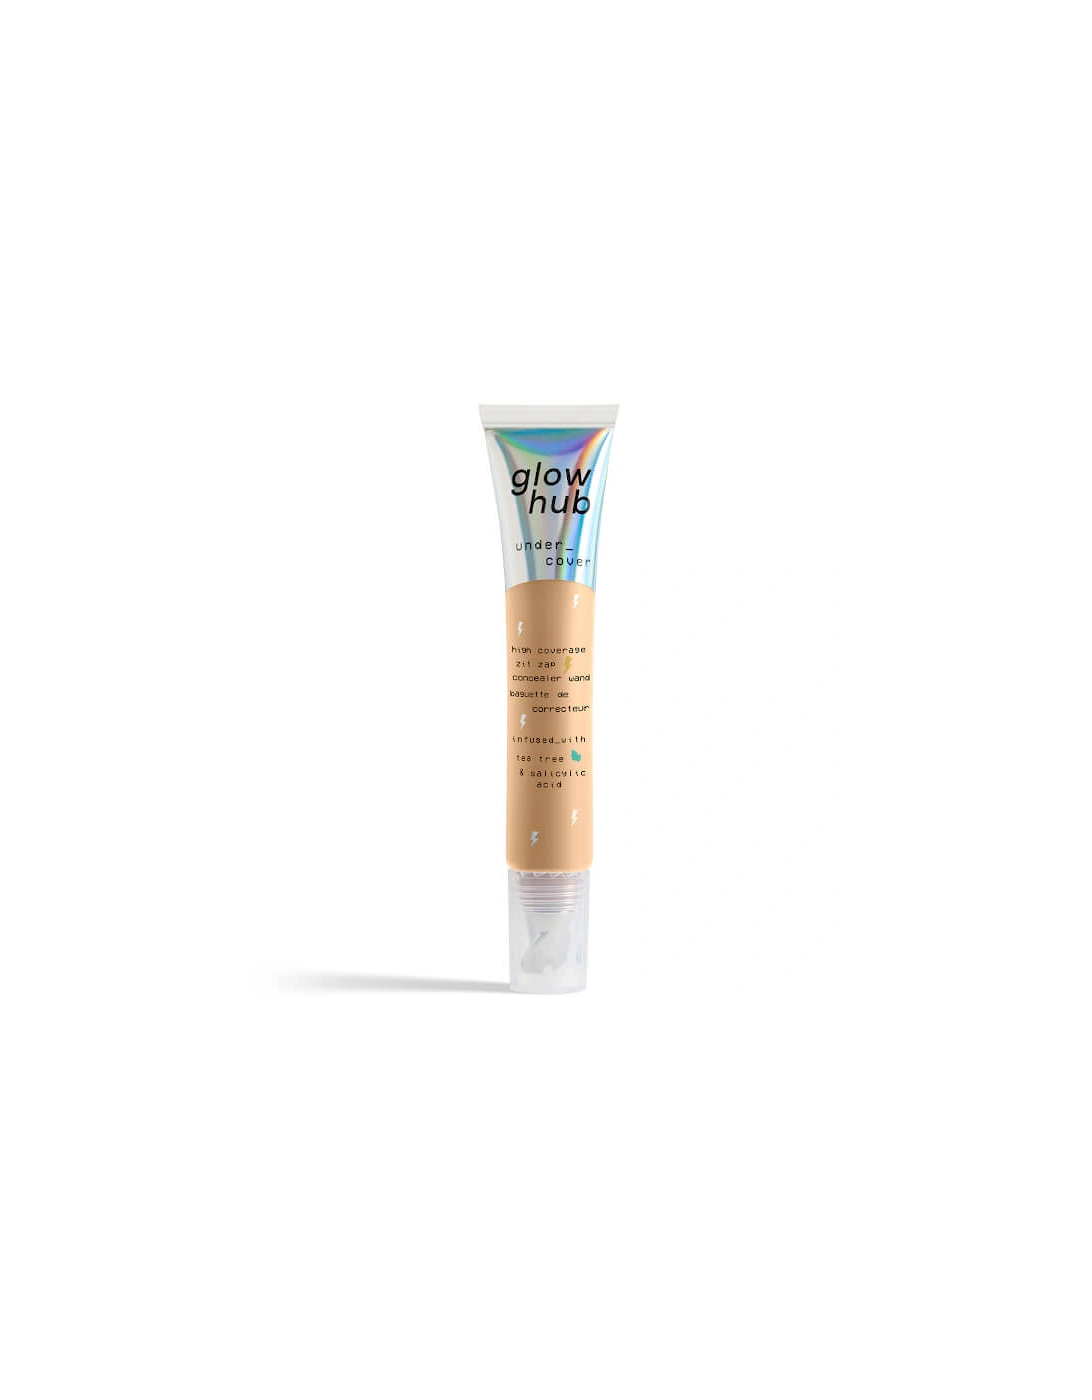 Under Cover High Coverage Zit Zap Concealer Wand - 07W, 2 of 1